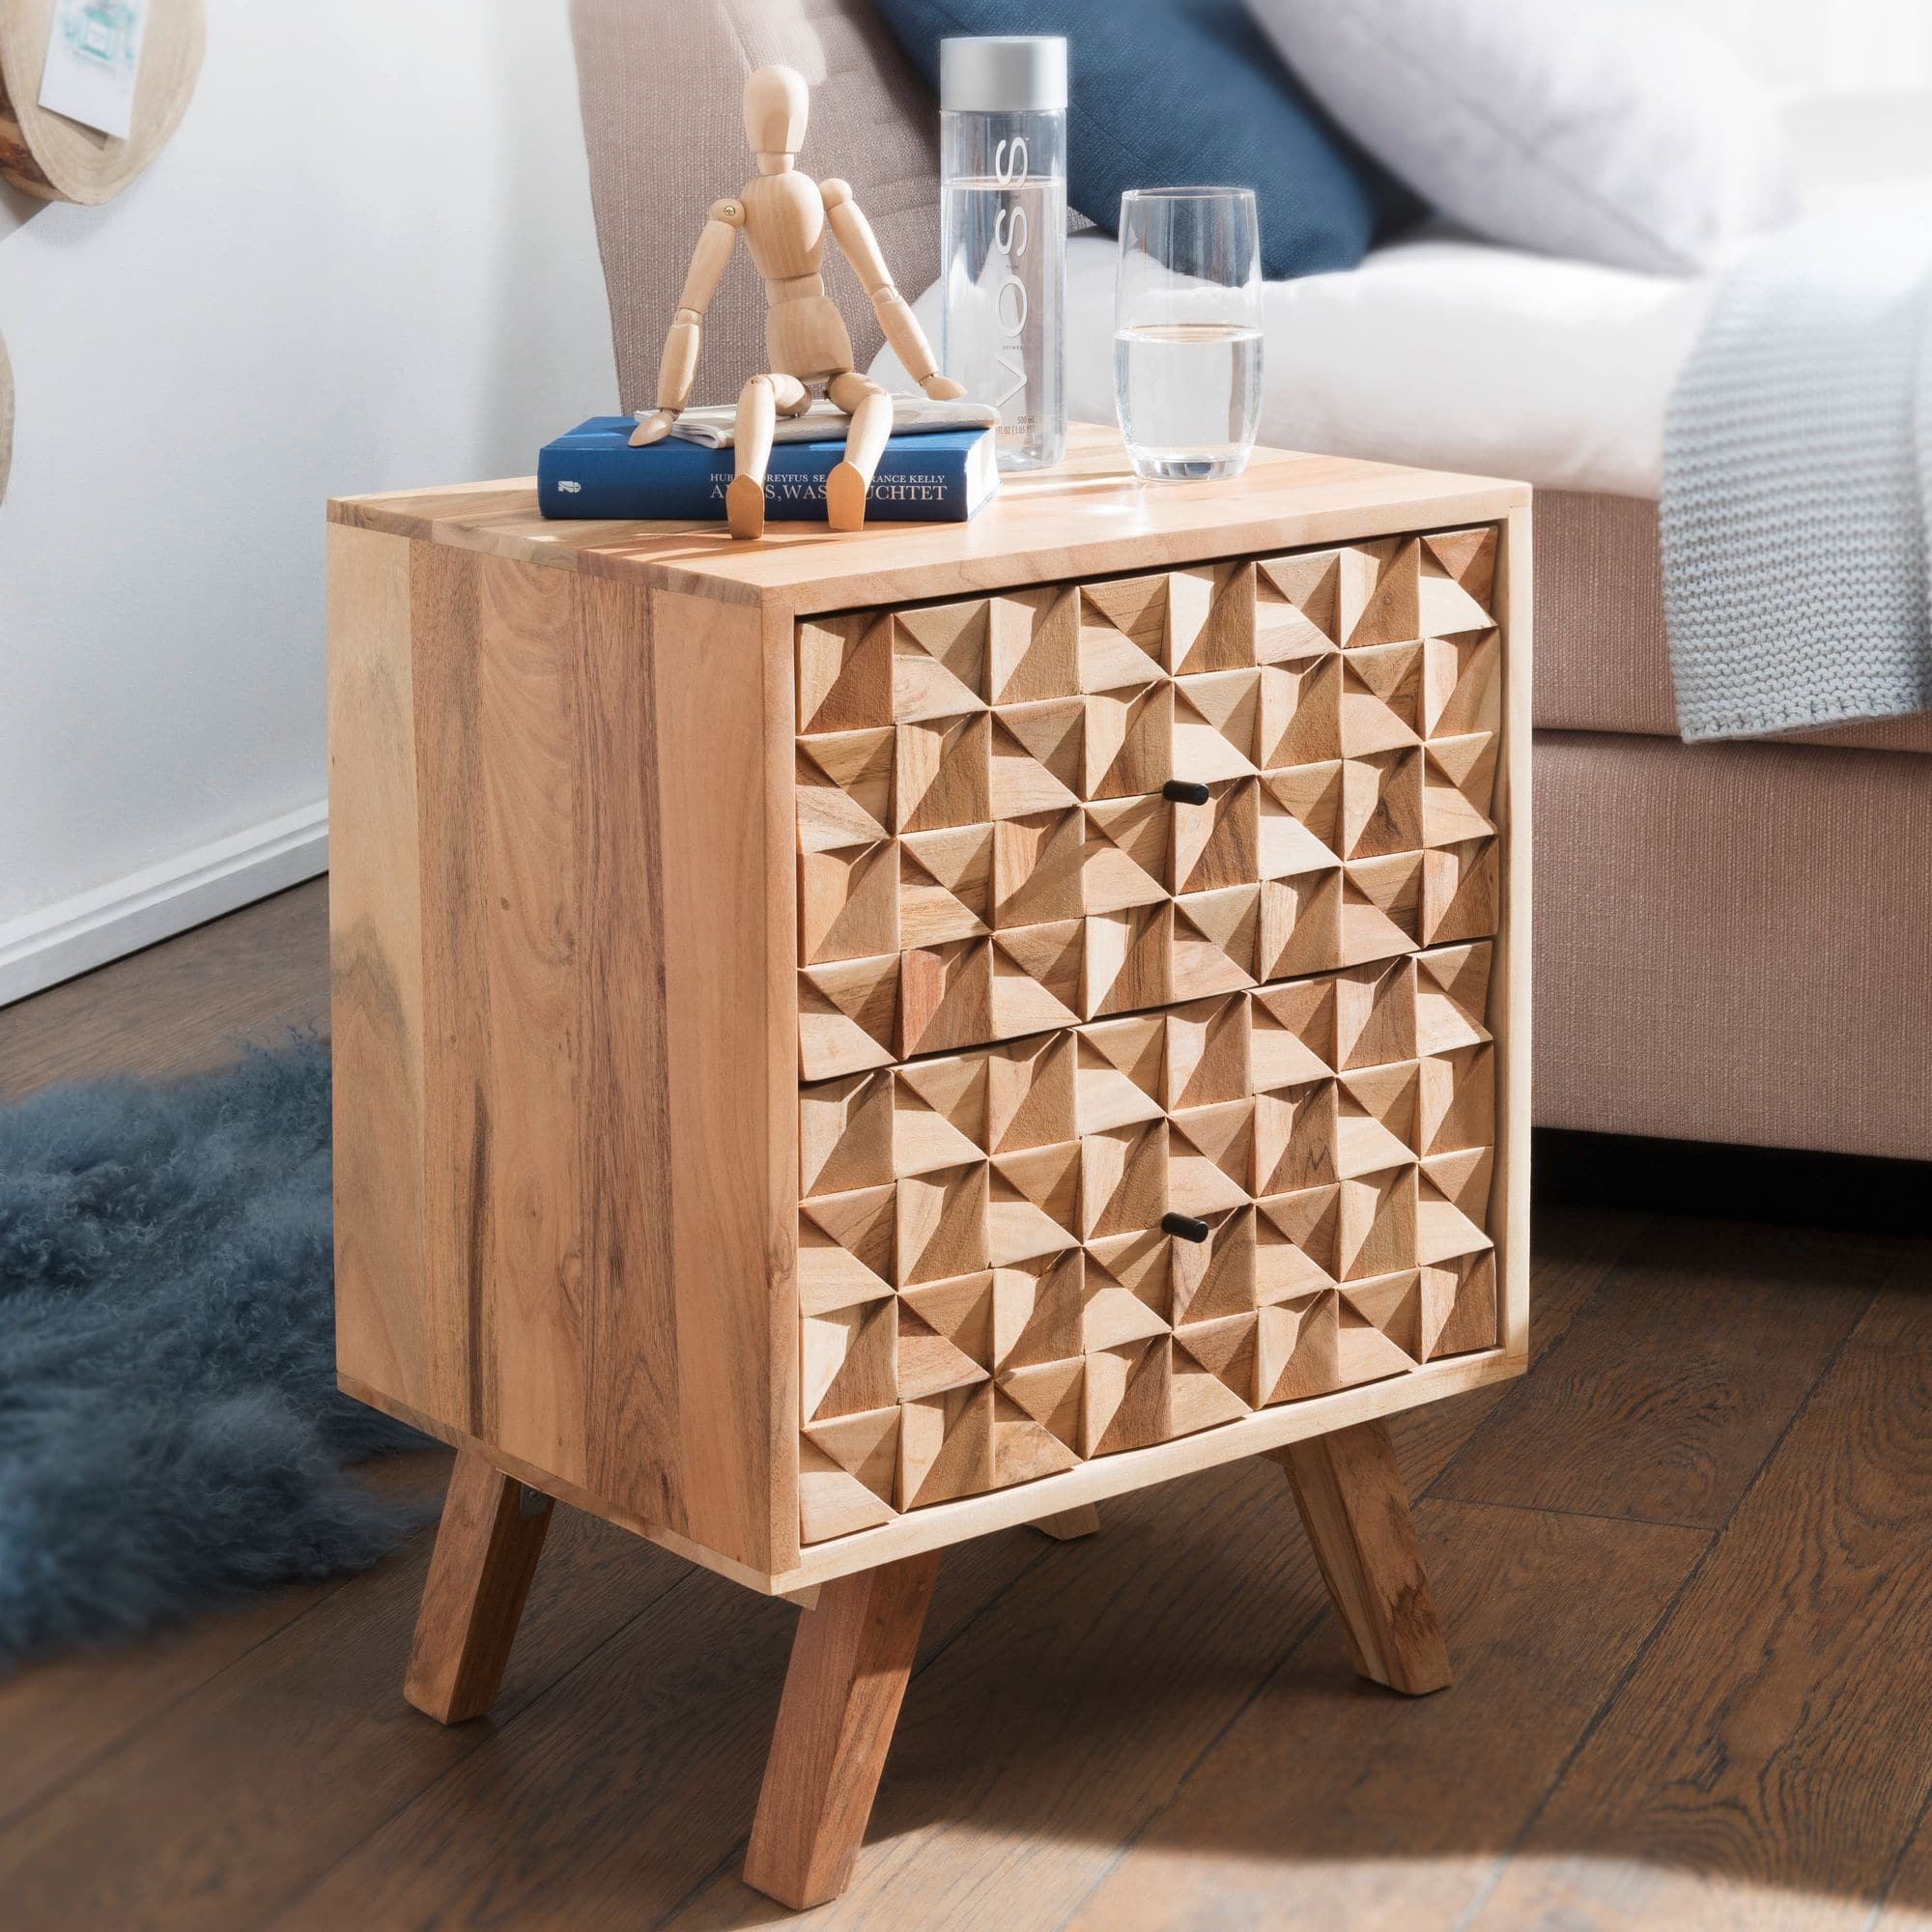 Nancy's Bedside Table - Bedside Table Solid Acacia Wood - Cabinet - Brown - 44 x 61 x 35 cm